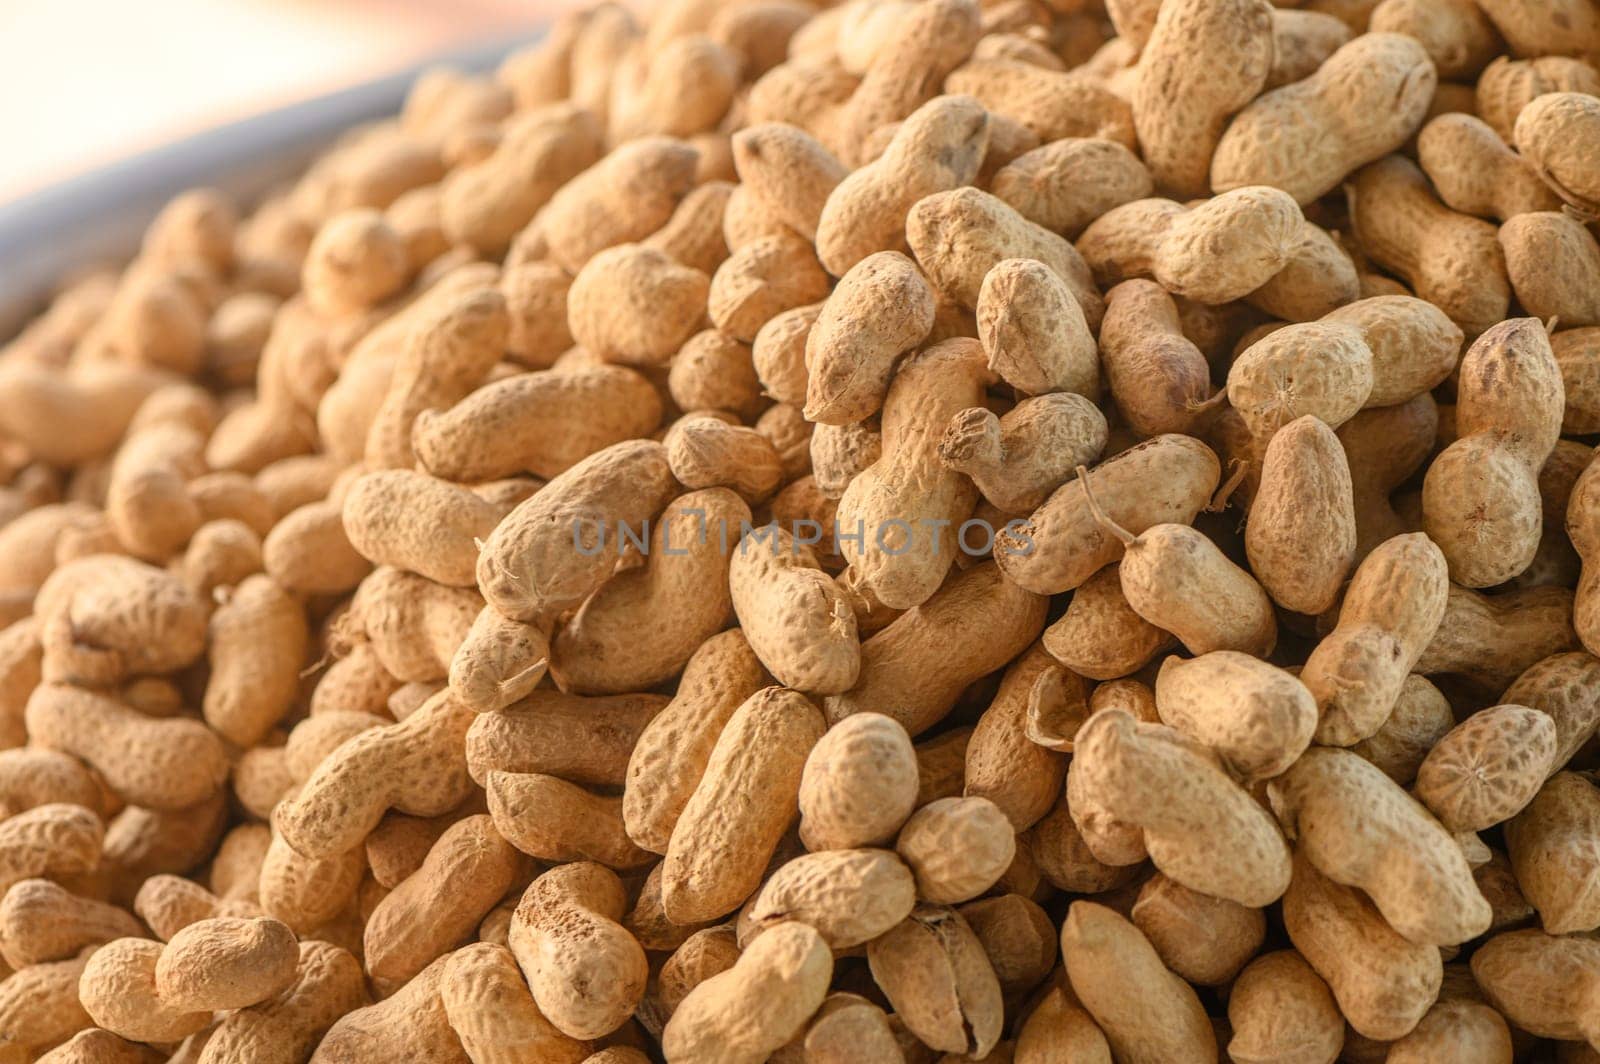 peanuts in pods piled in a pile at the local market